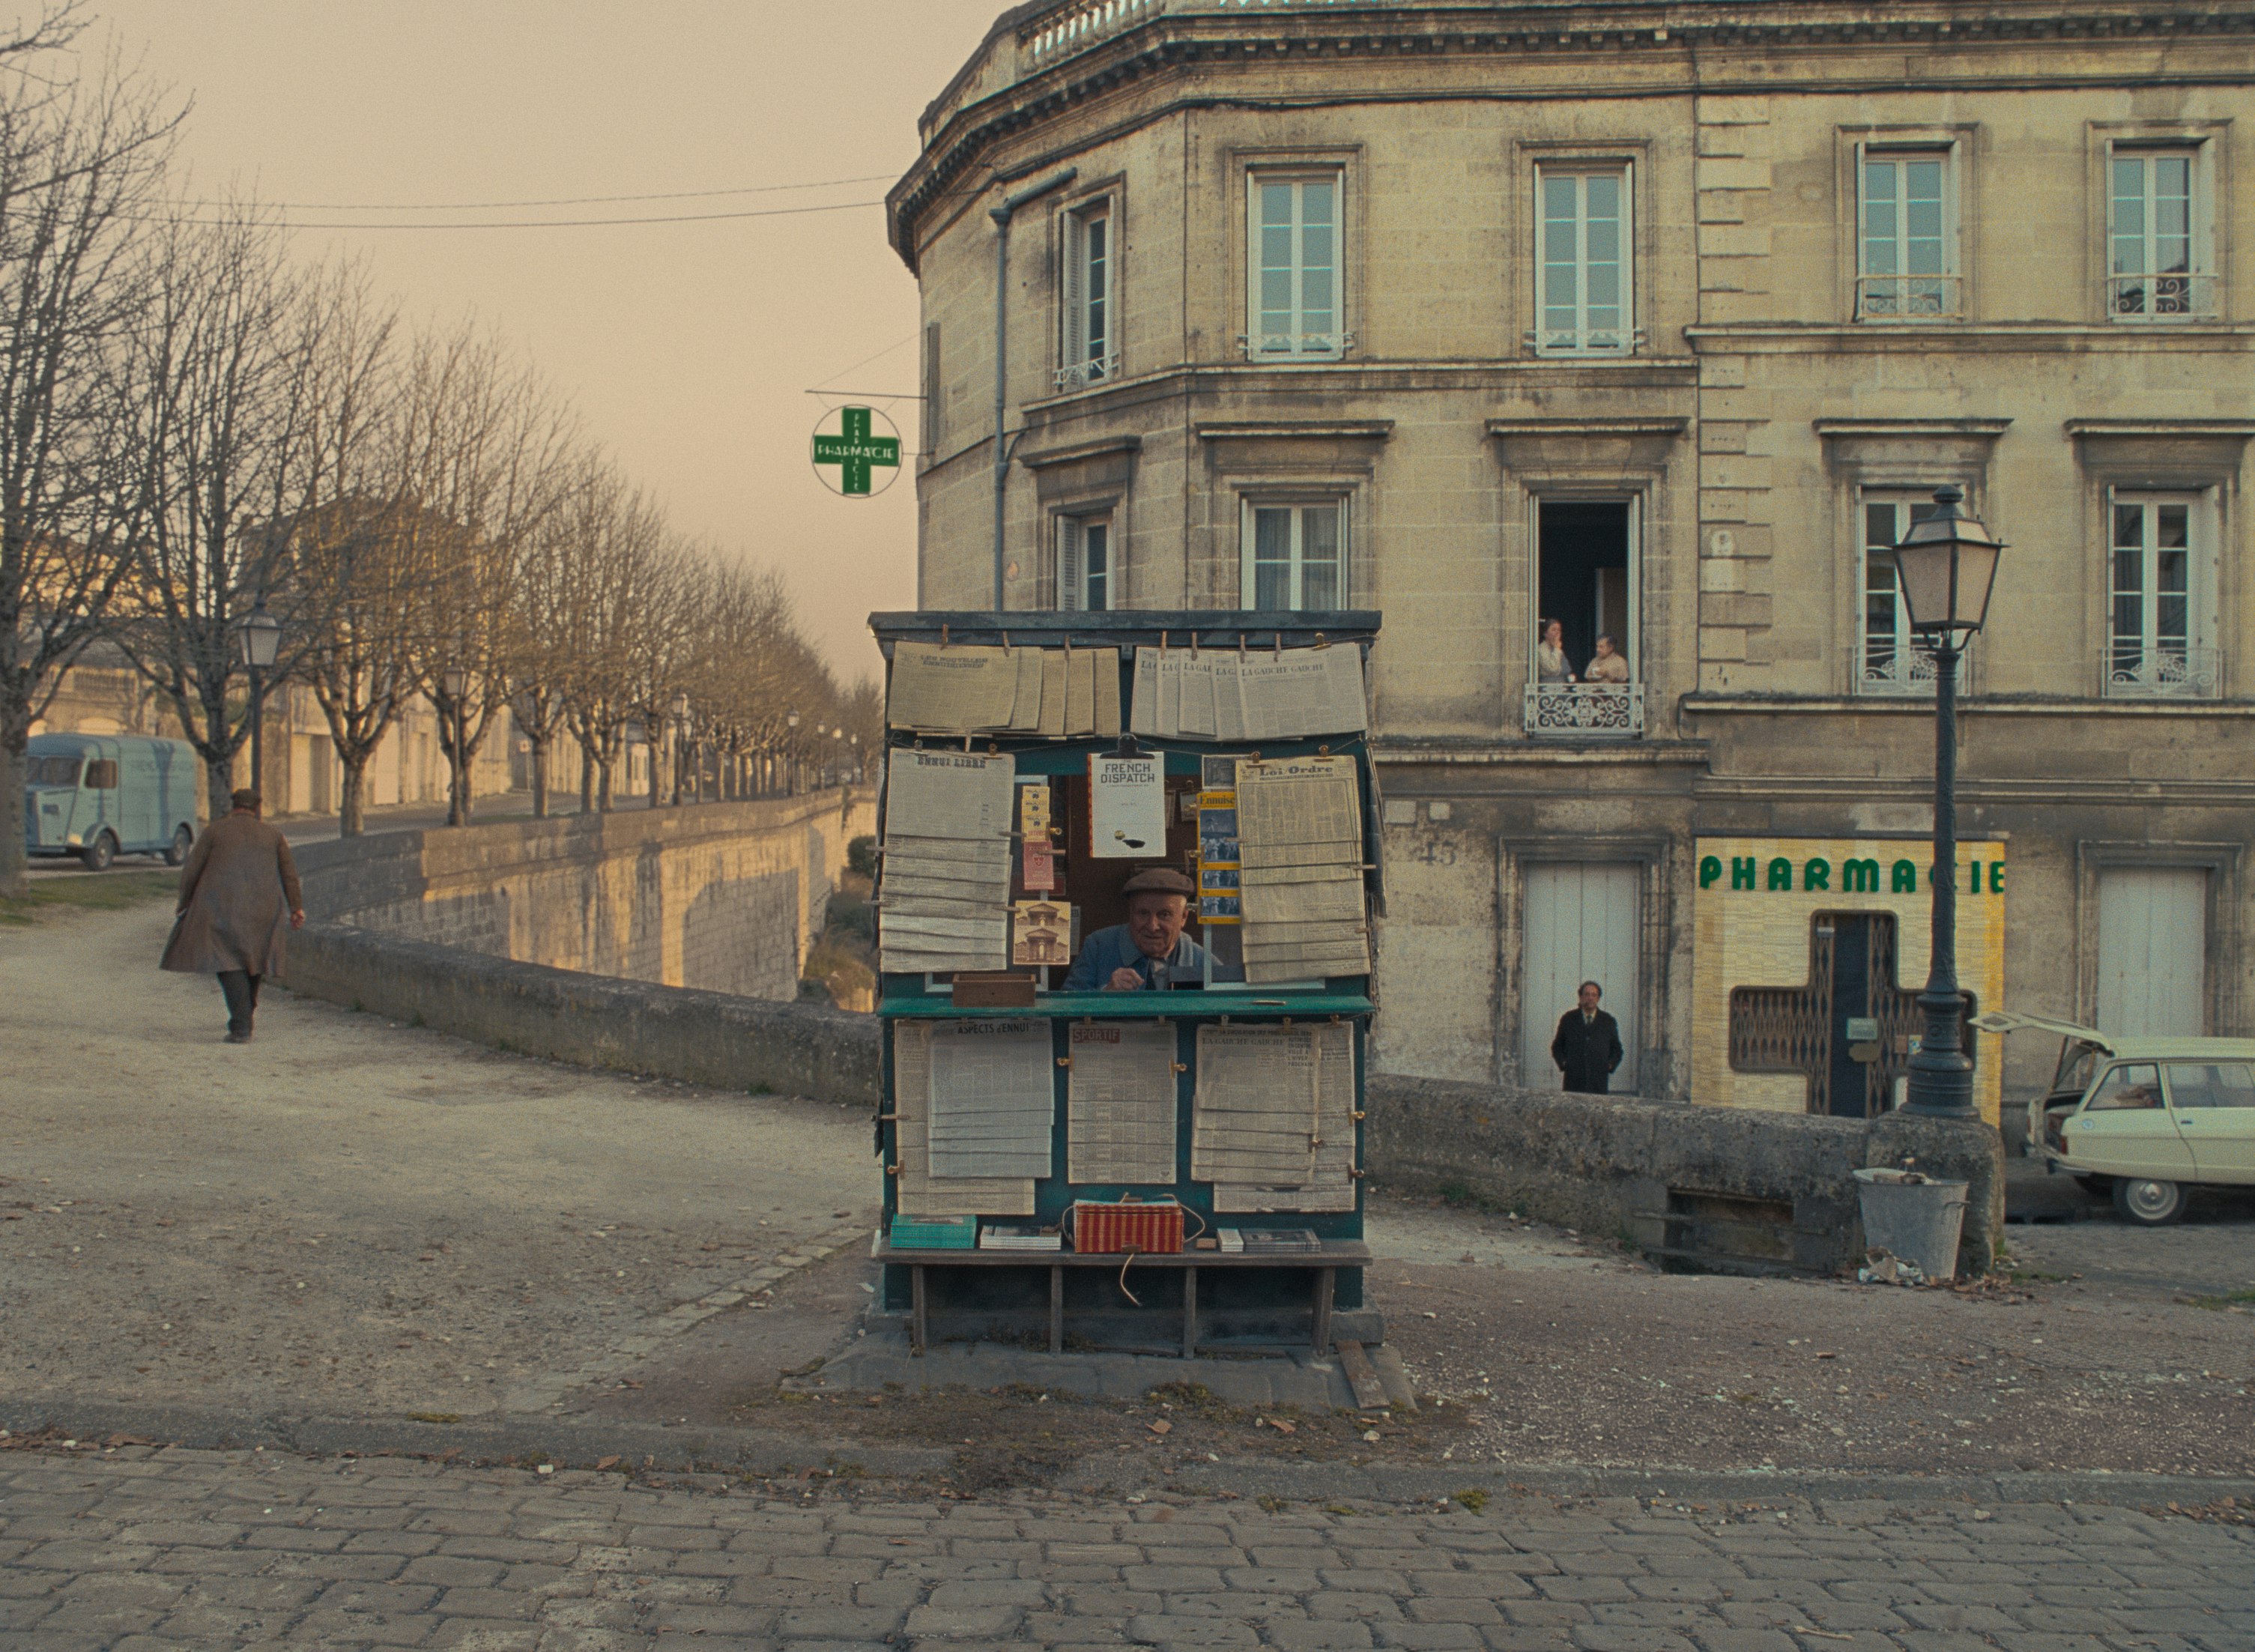 A man pops his head out of a newspaper kiosk in a still from the film The French Dispatch